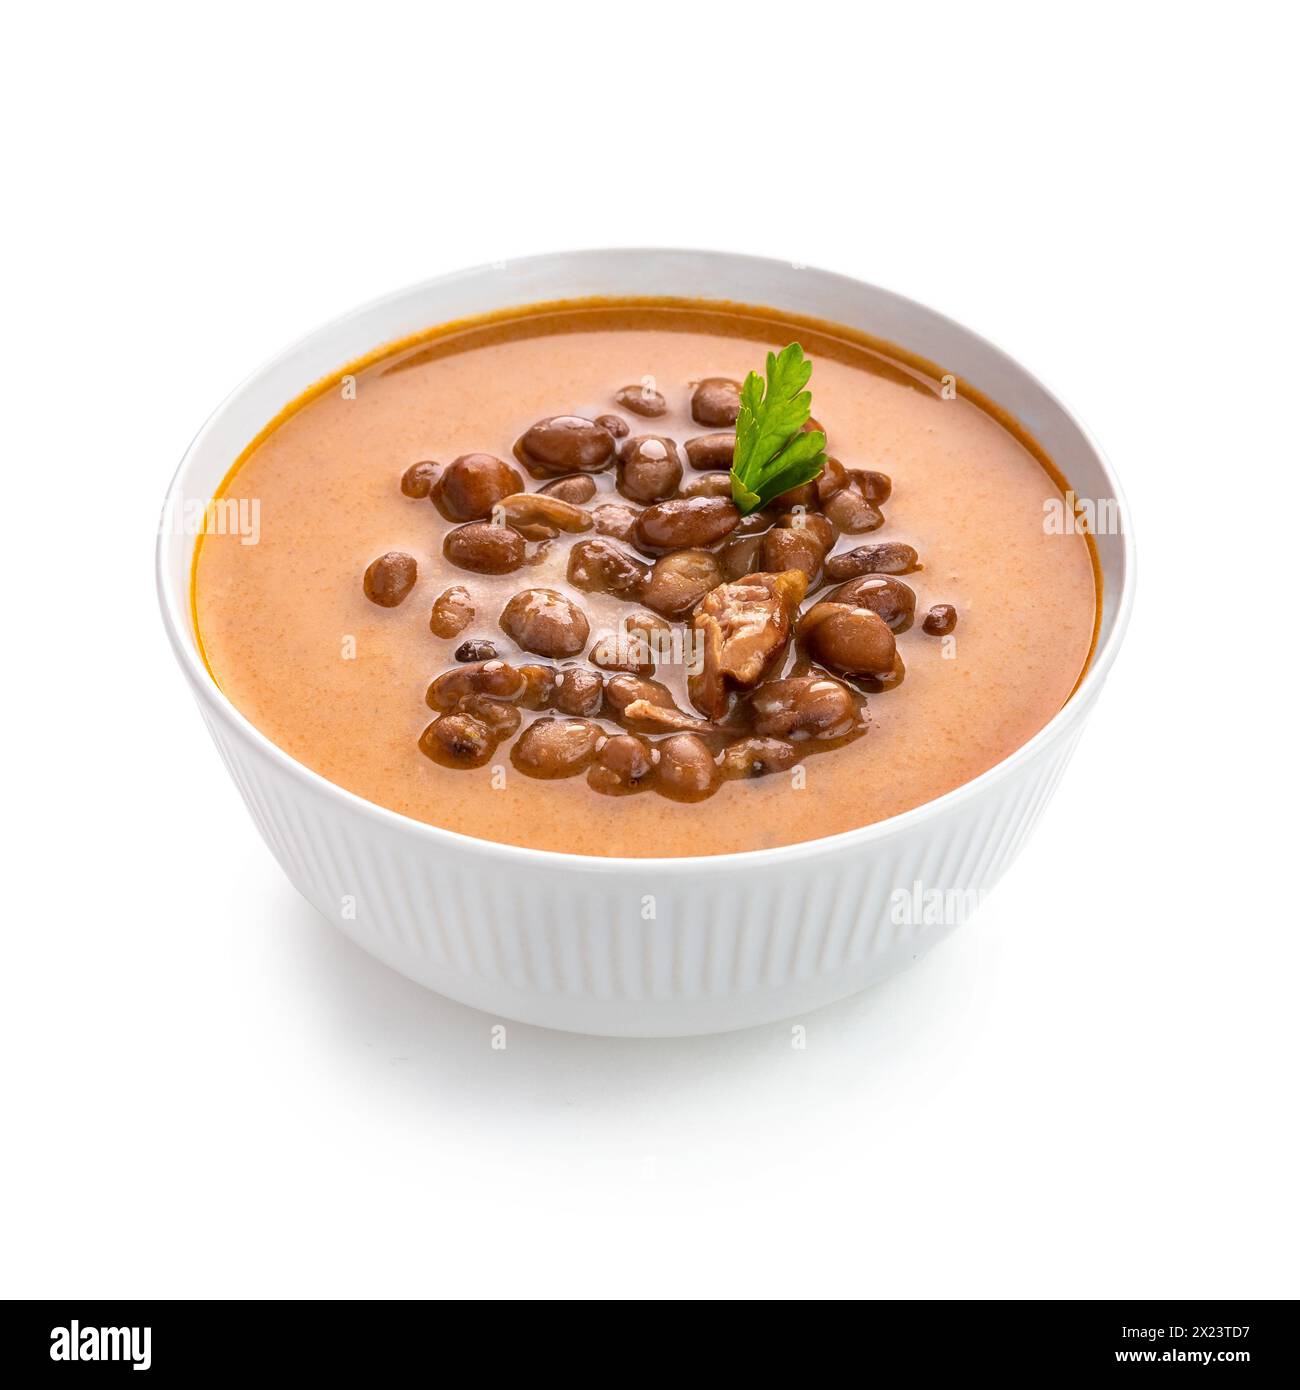 Dive into a bowl of hearty bean soup infused with tender pork pieces, offering warmth and comfort on a chilly day. The creamy white bowl highlights th Stock Photo